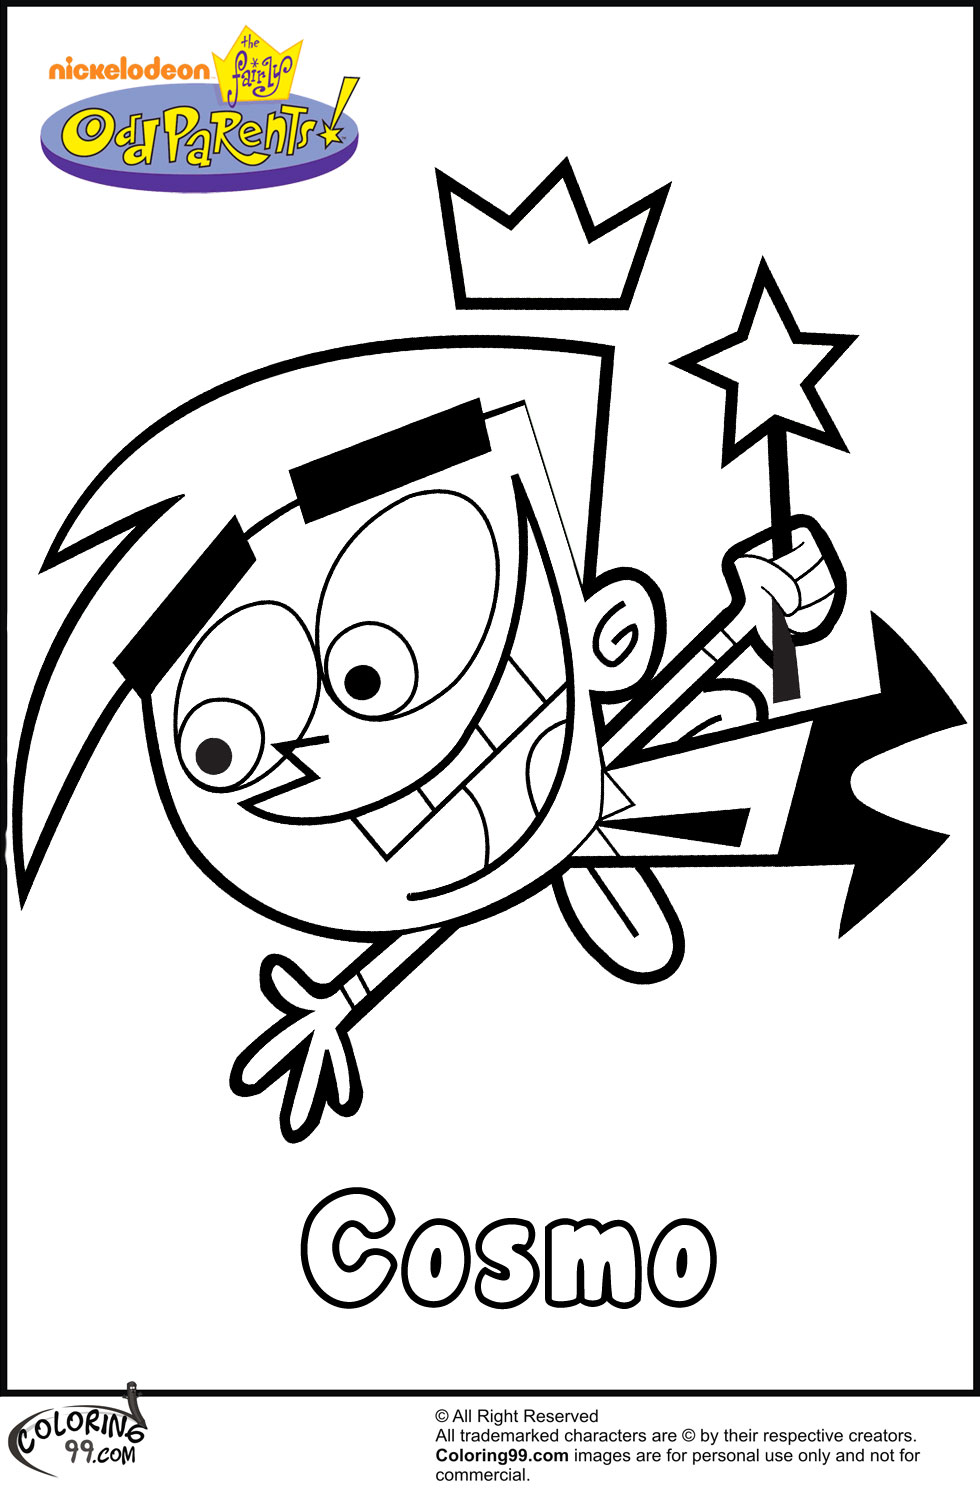 fairy oddparents coloring pages - photo #24